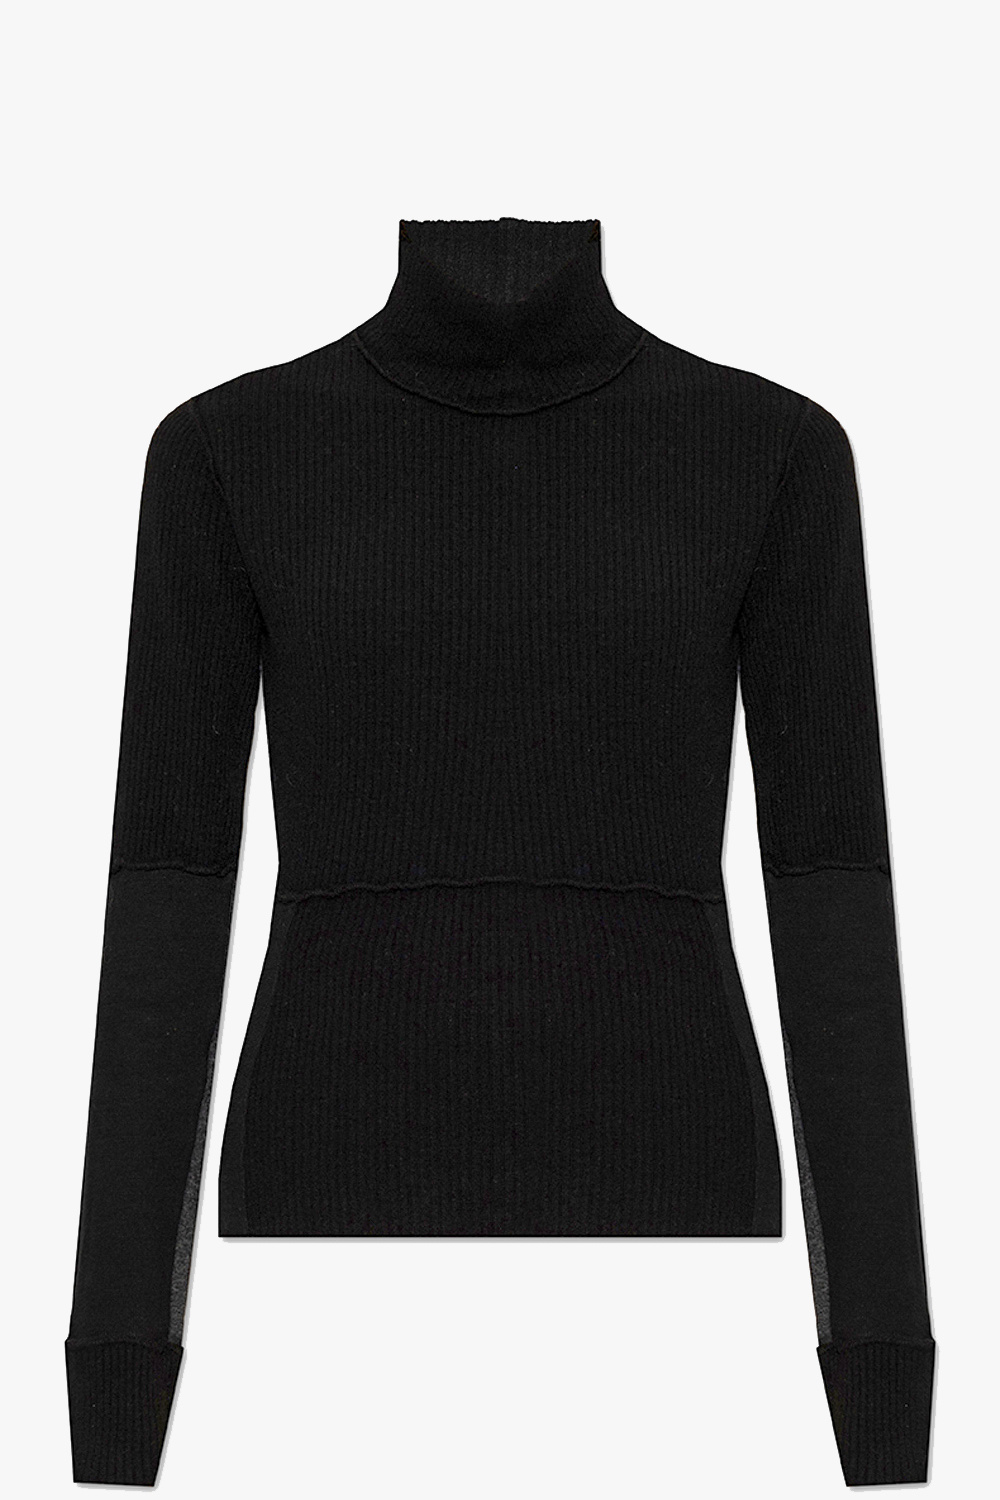 MM6 Maison Margiela Turtleneck sweater abstract with stitching details